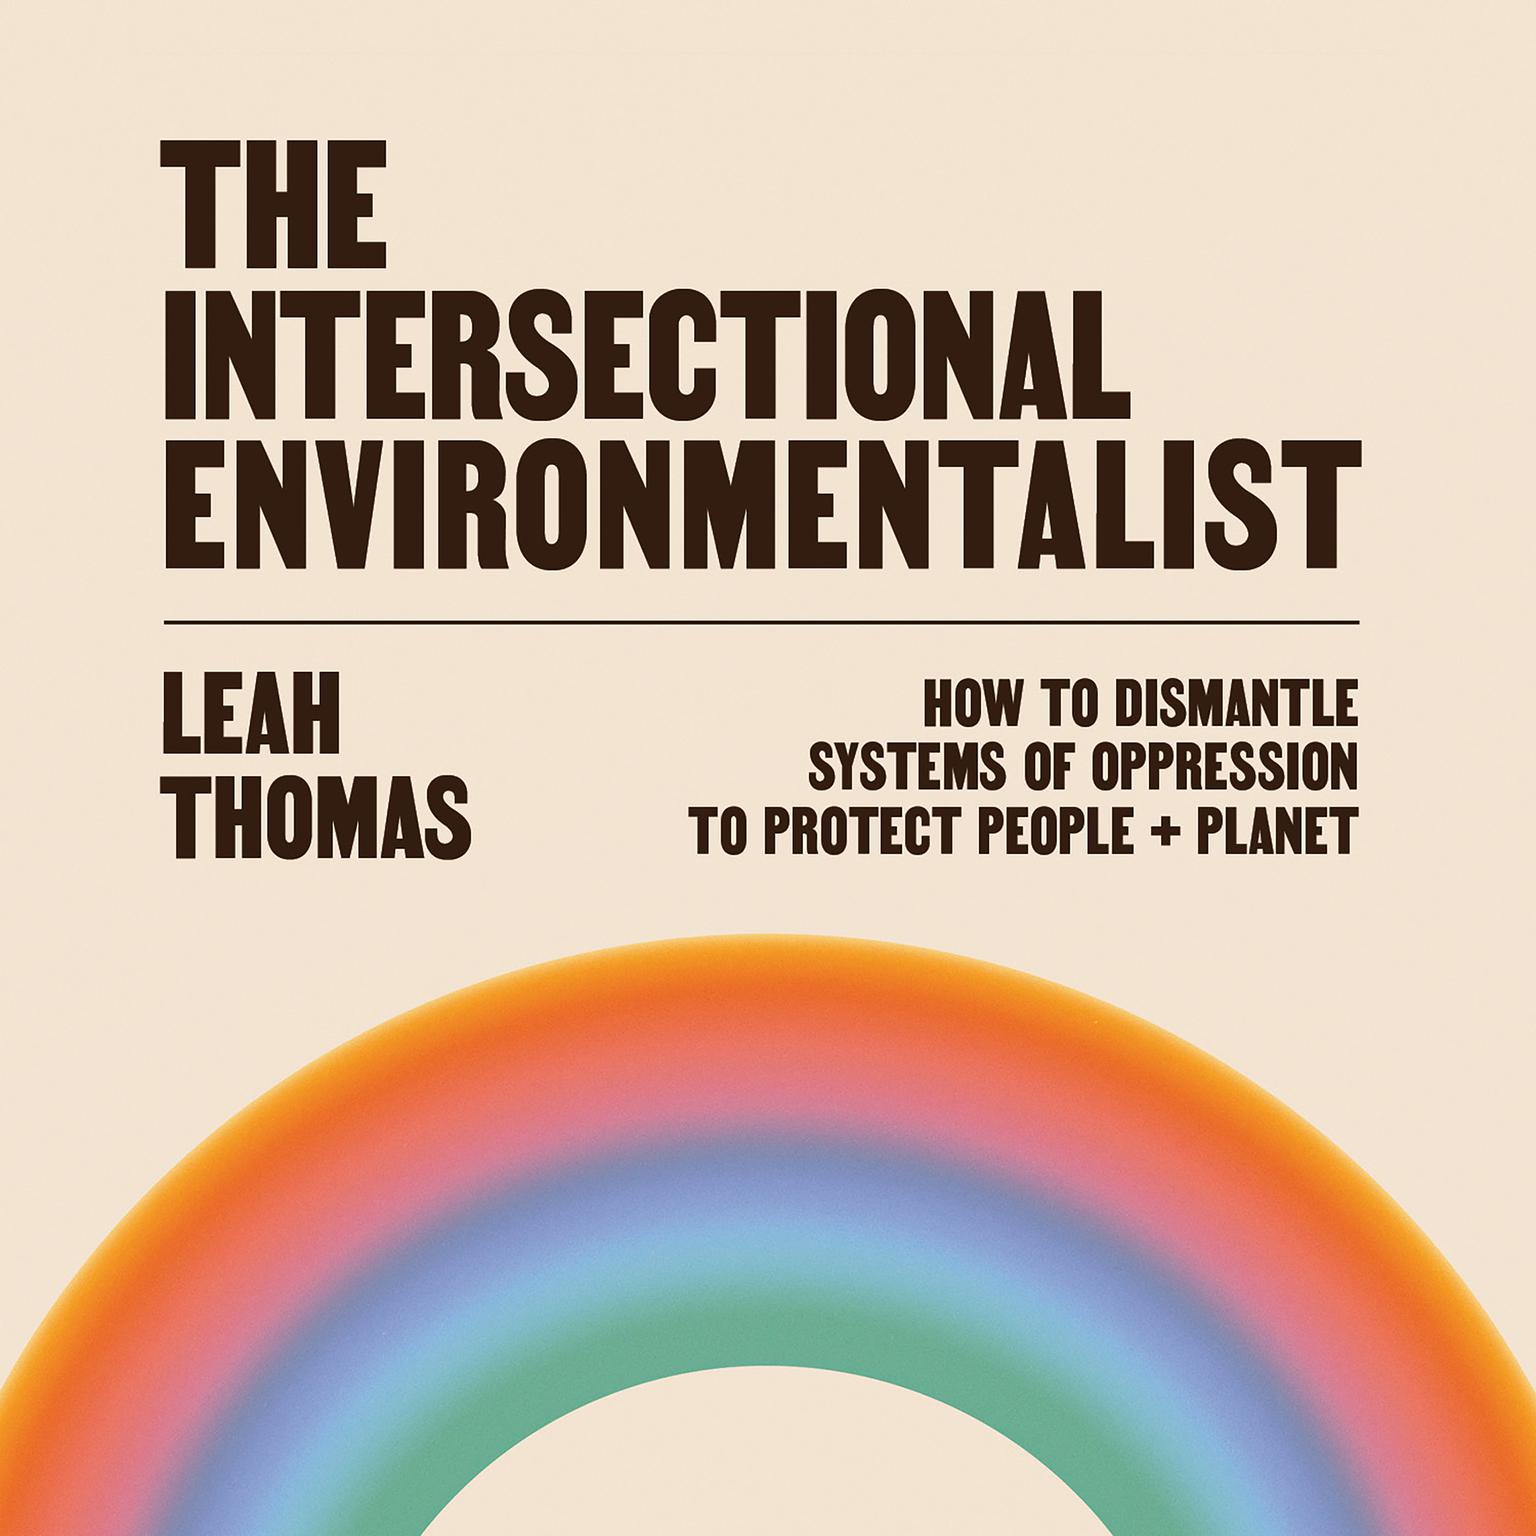 The Intersectional Environmentalist: How to Dismantle Systems of Oppression to Protect People + Planet Audiobook, by Leah Thomas